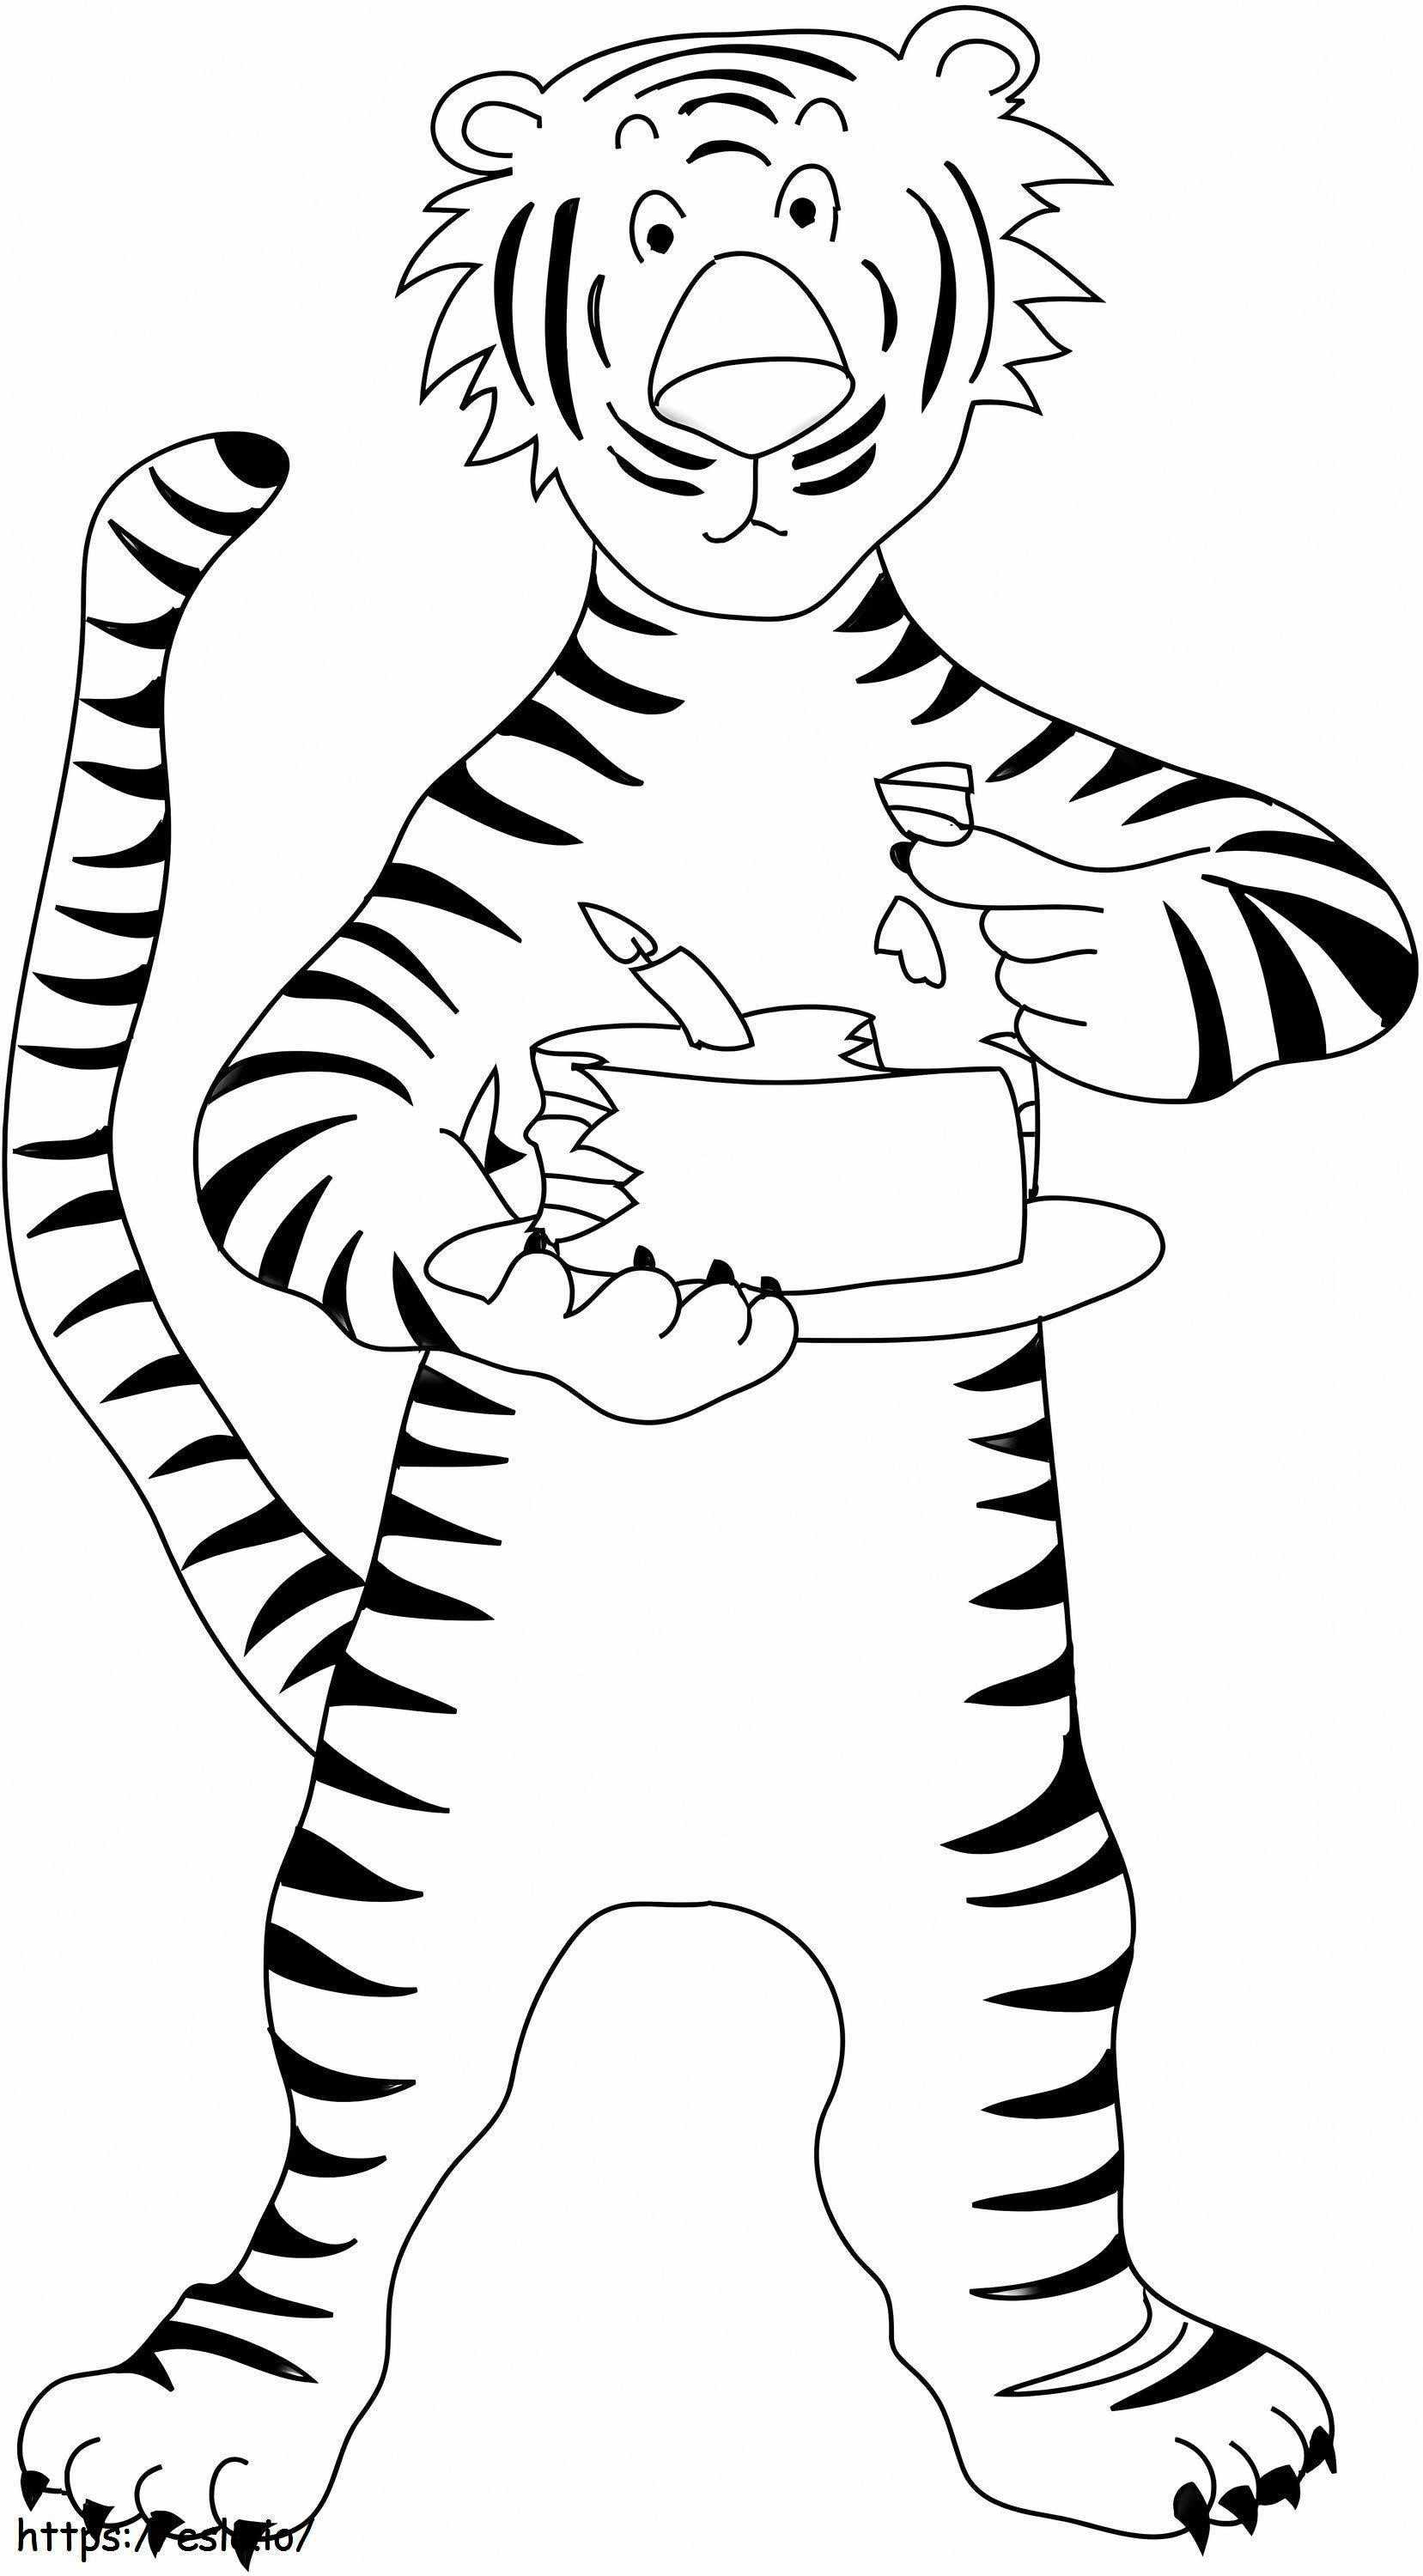 Tiger Cooking coloring page